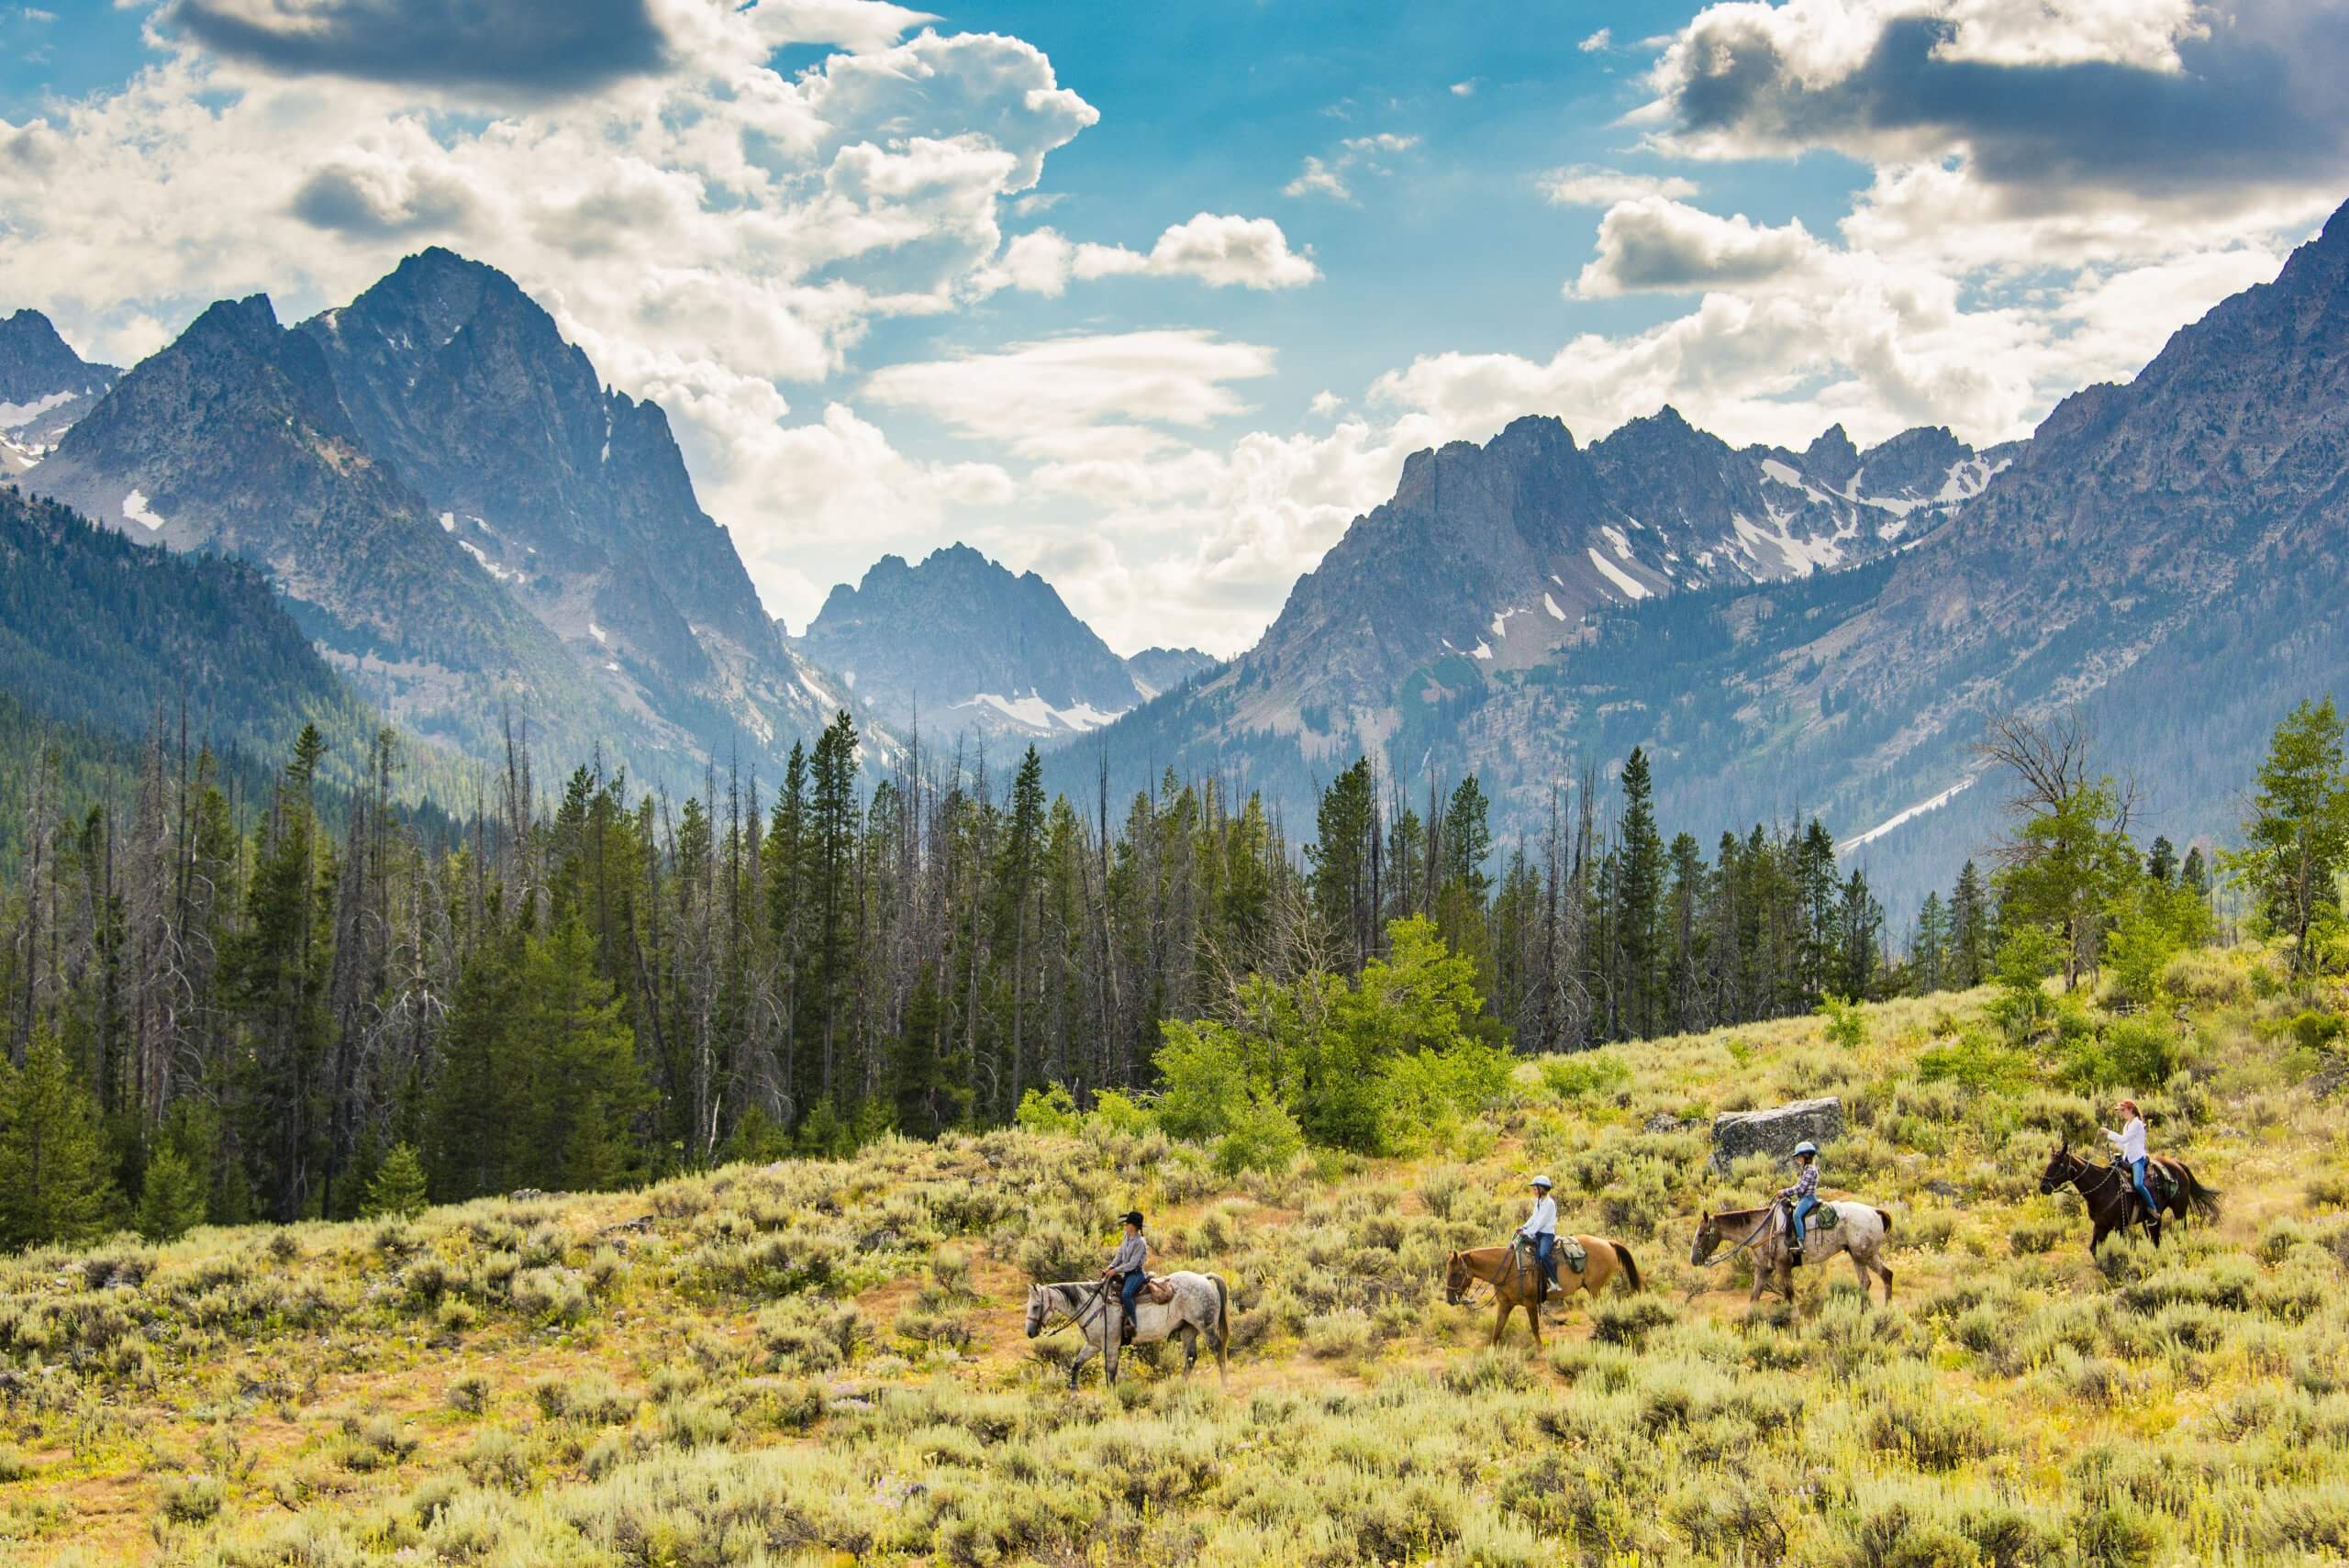 People horseback riding in the Sawtooth Mountains.